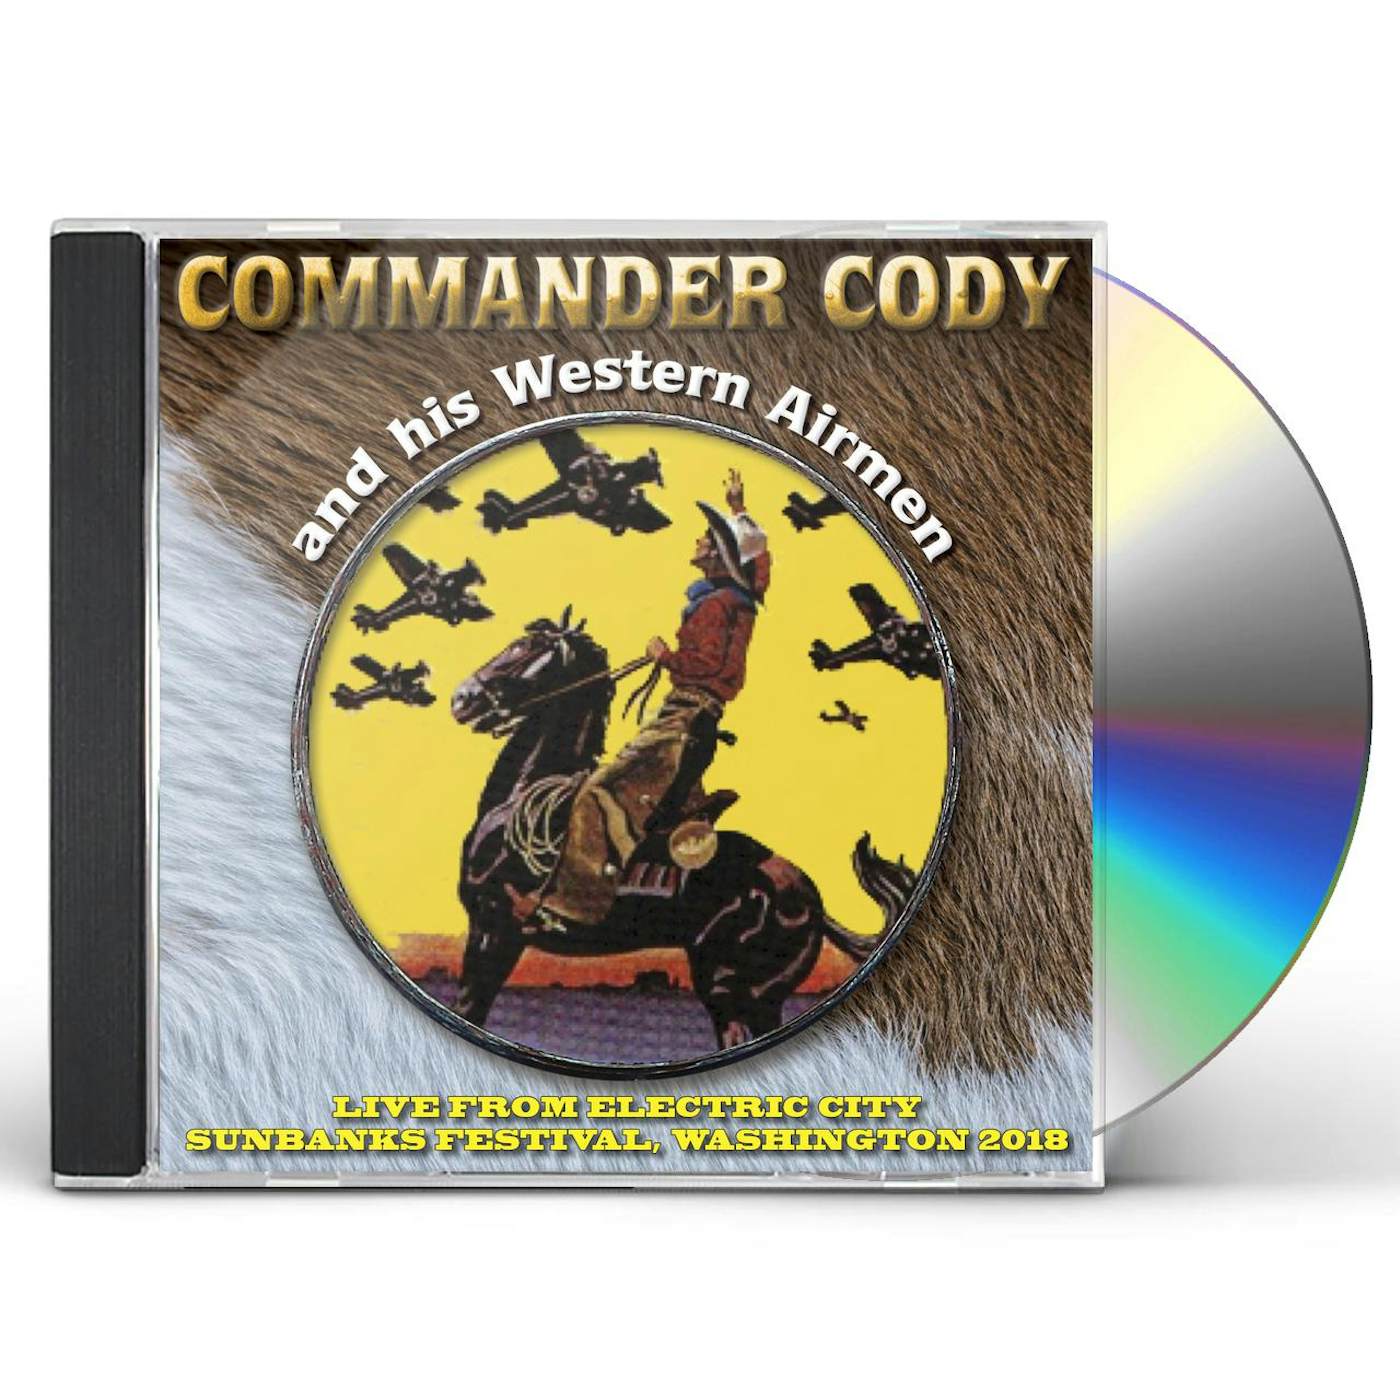 Commander Cody LIVE FROM ELECTRIC CITY CD